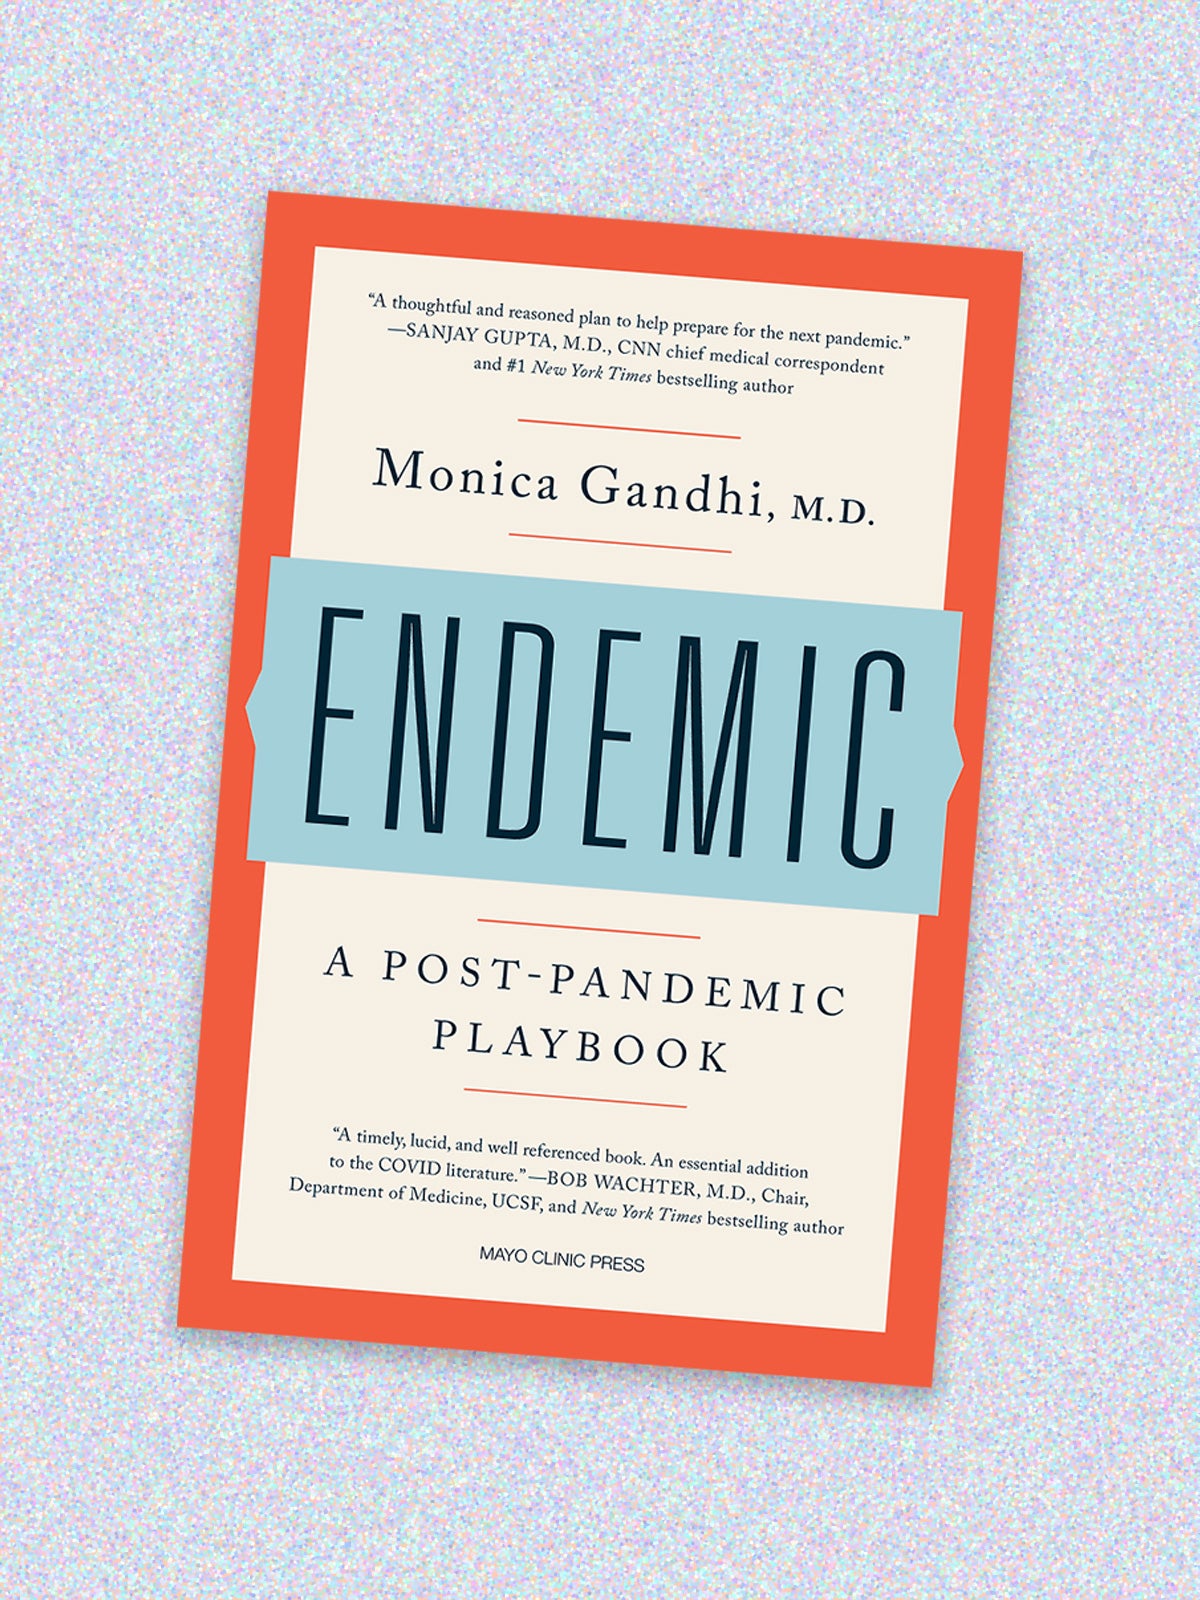 Book cover for “Endemic: A Post-Pandemic Playbook” by Monica Gandhi, M.D. The book cover has a light beige background, bright orange border and the word “ENDEMIC” in all caps in a light blue bar in the middle. Above the title is a quote and the author’s name, and below is the subtitle and another quote. The compassion is on a light purple speckled background.